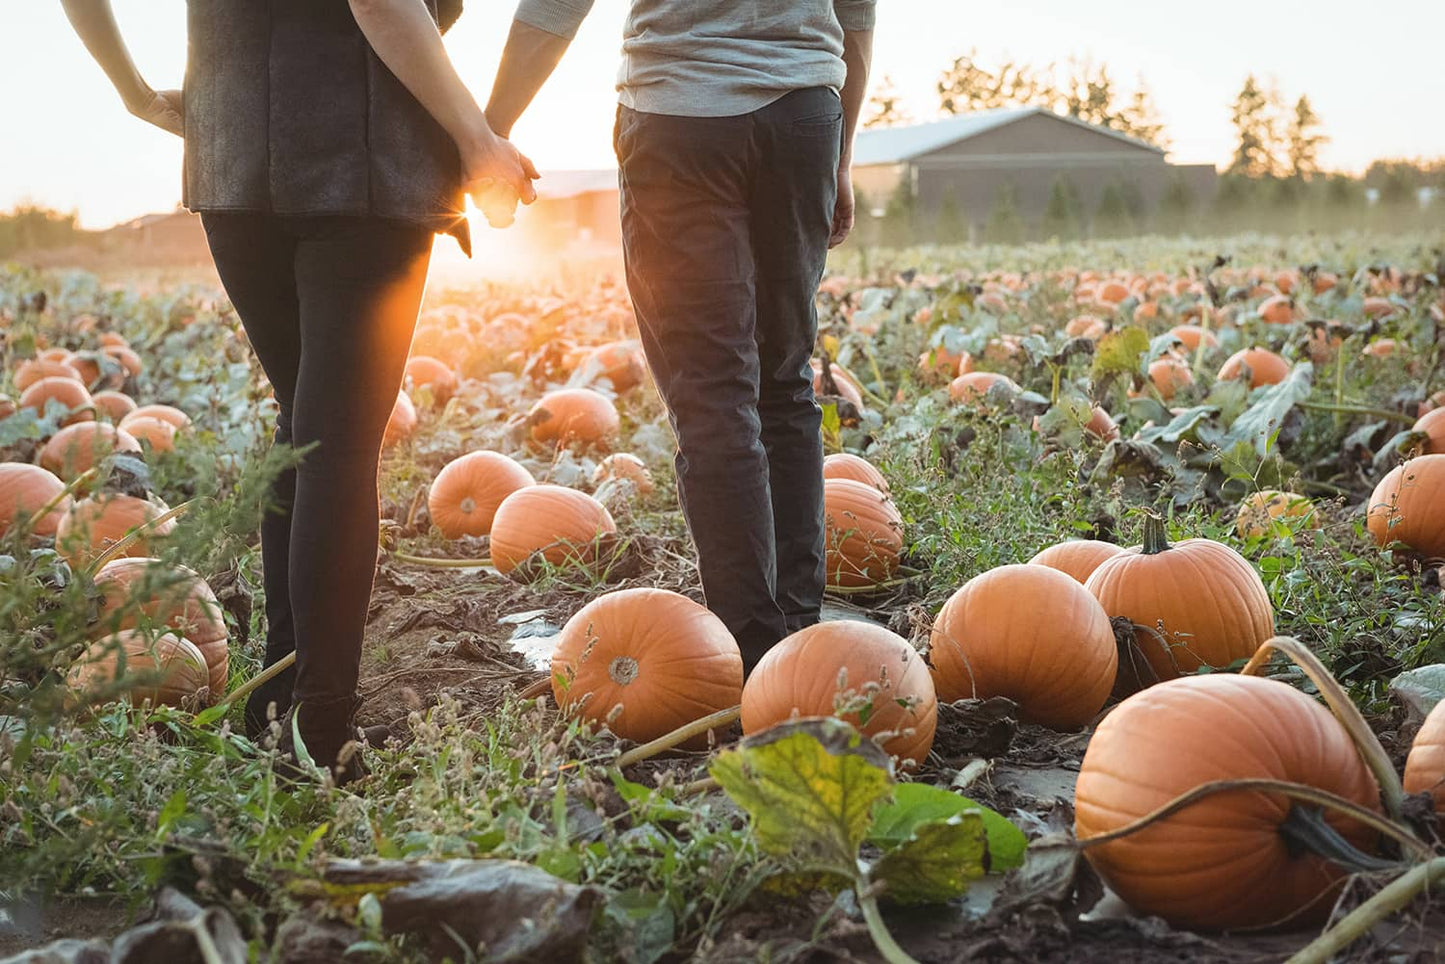 Couple holding hands in a pumpkin patch as the sun is setting in the background